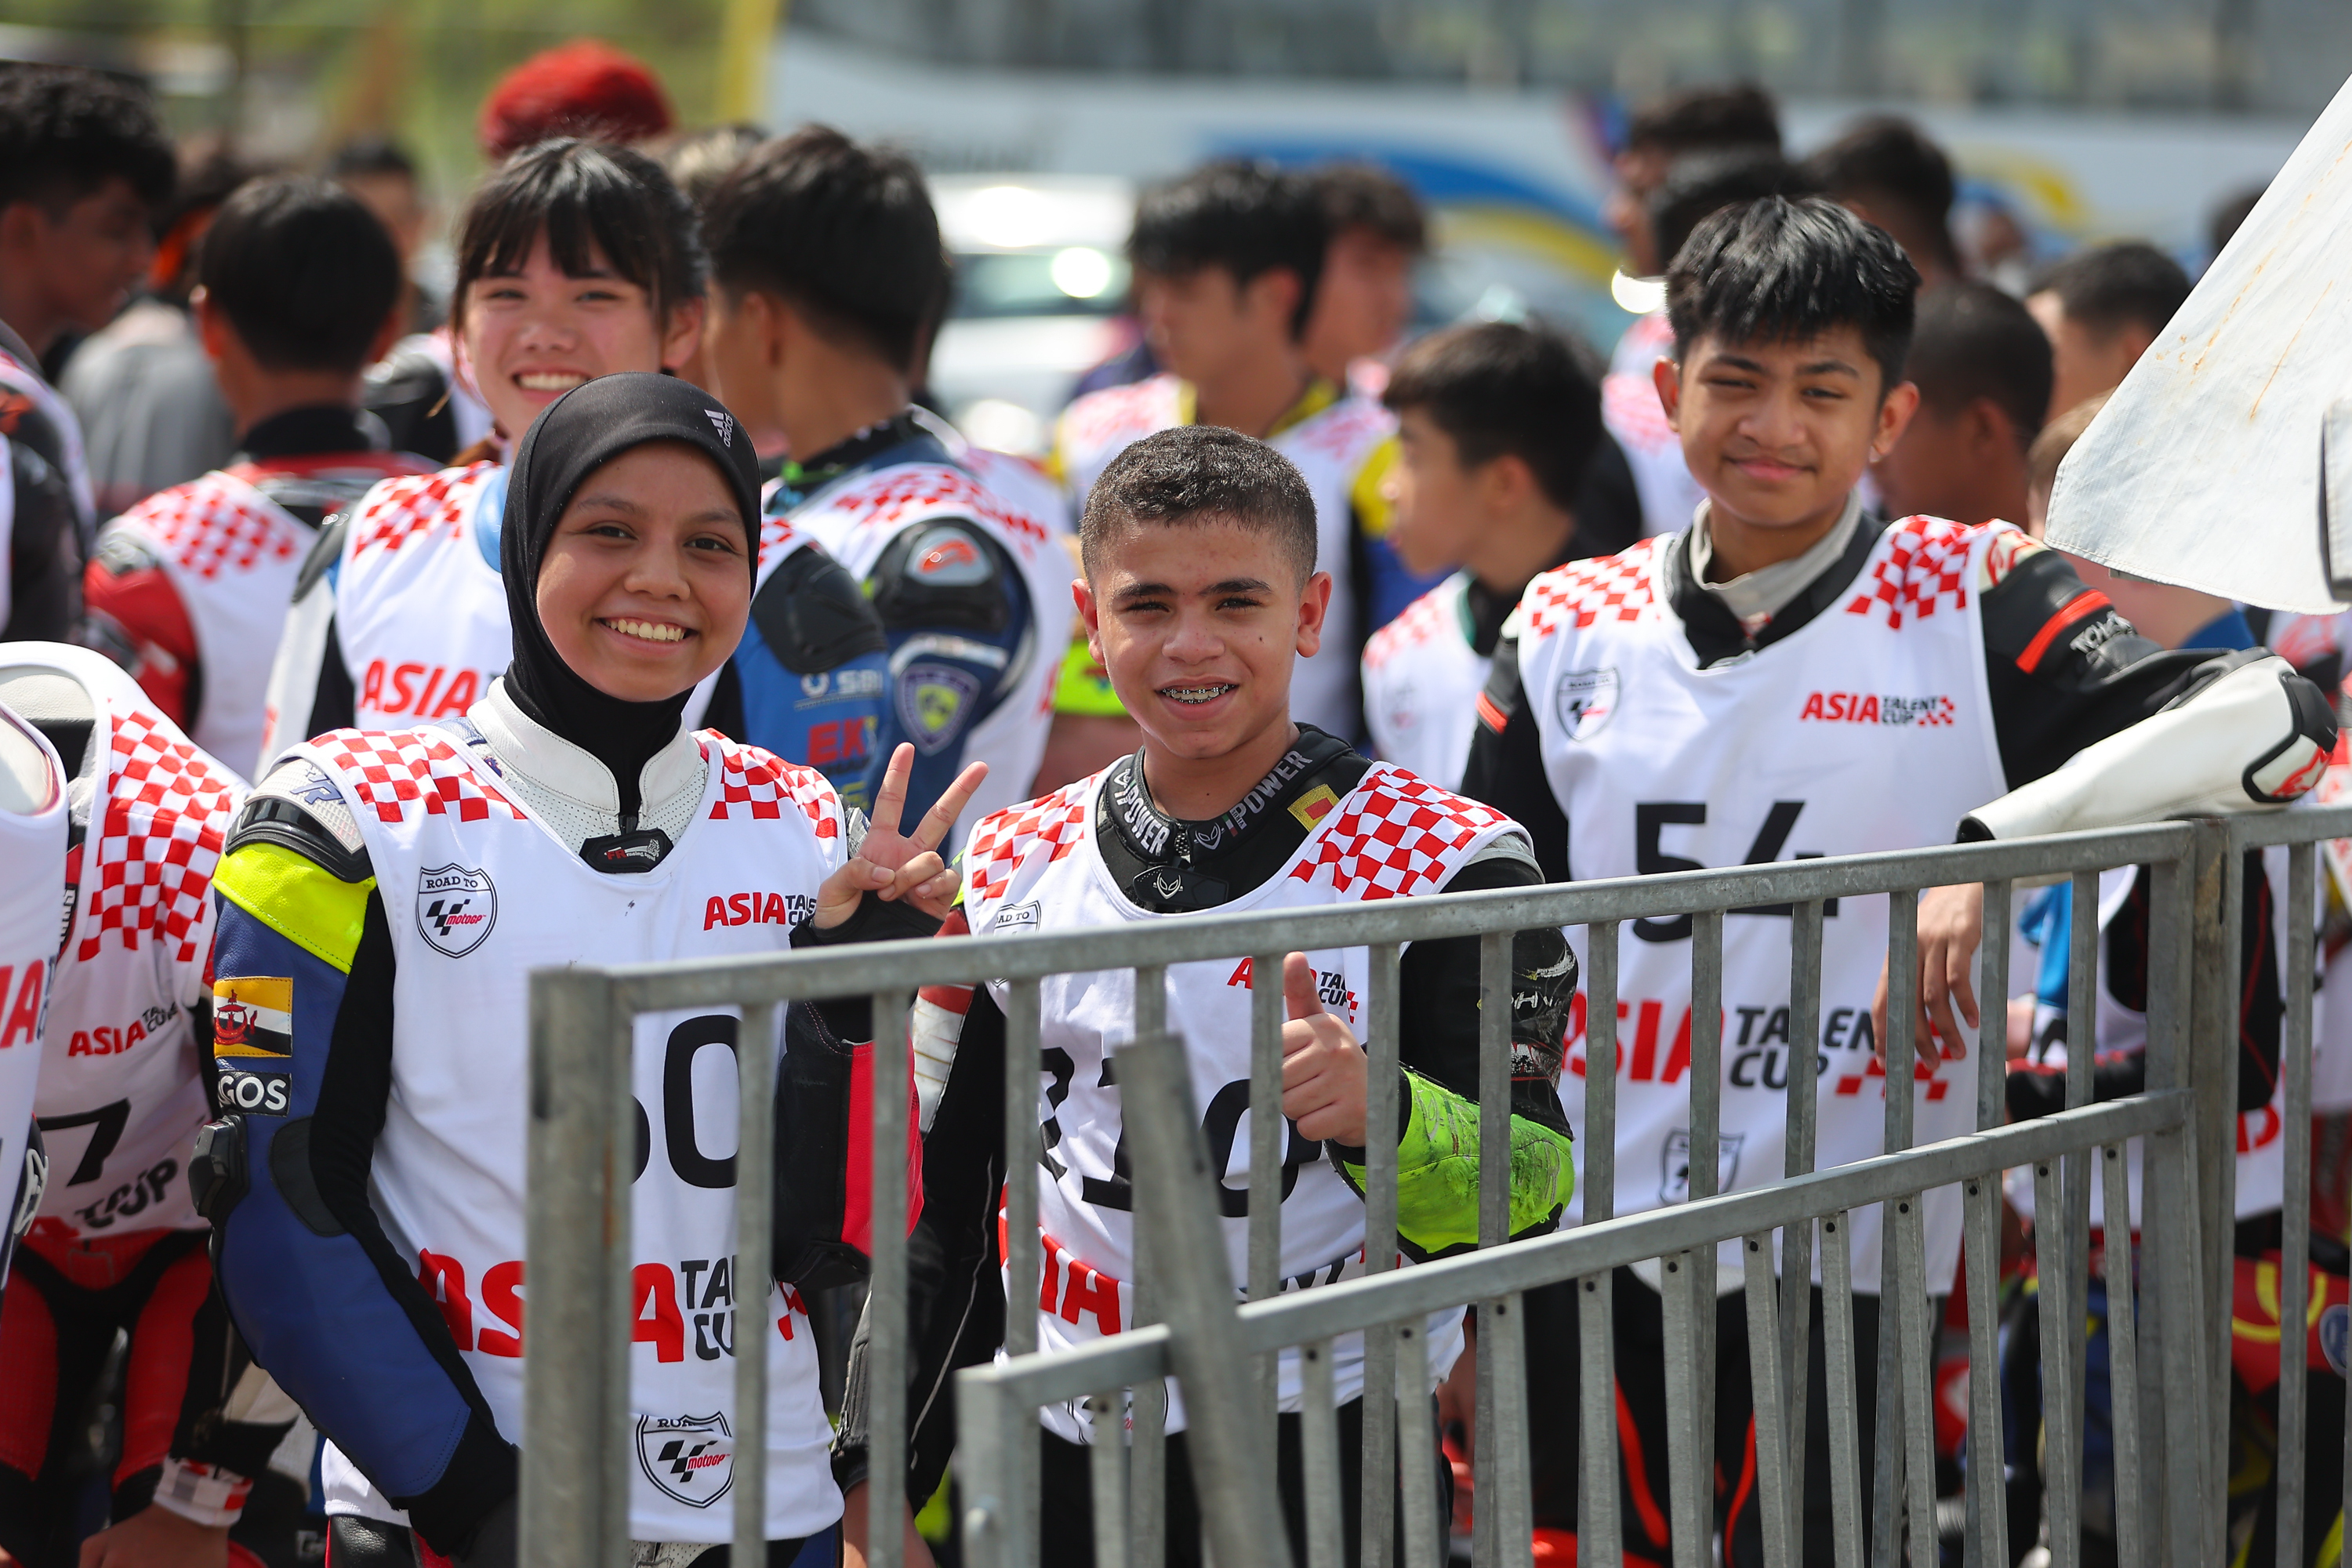 Selection Event for the 2024 Idemitsu Asia Talent Cup Sepang Karting Track